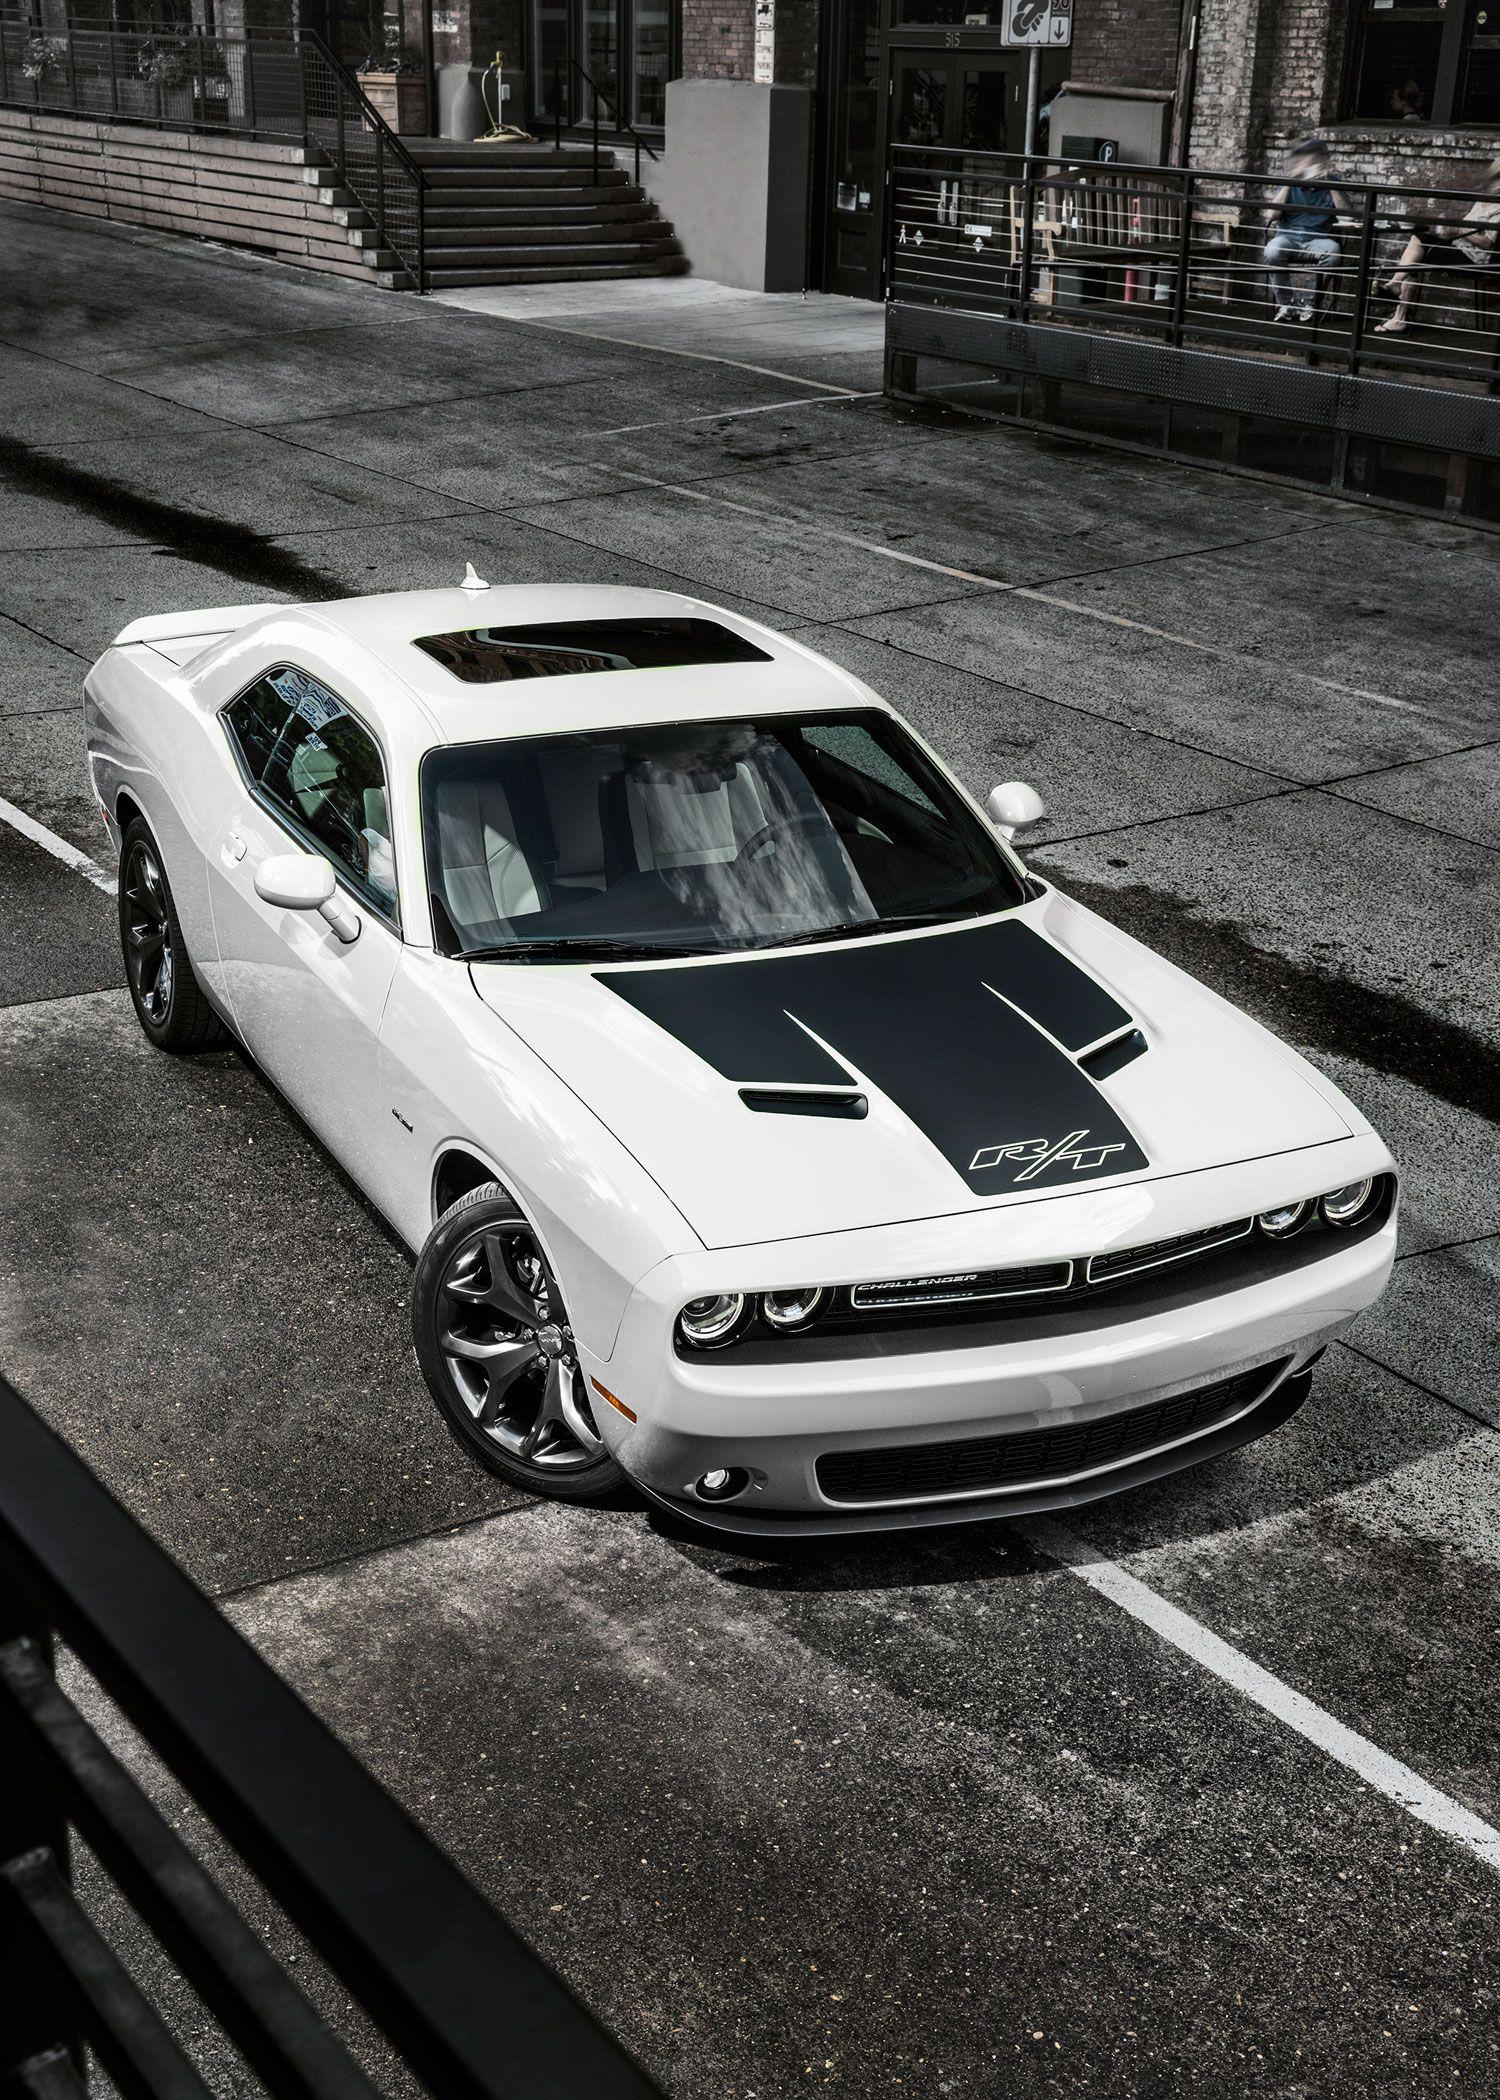 Black and White Dodge Hellcat Logo - Just Listed: 2016 Dodge Challenger Hellcat Convertible. Automobile